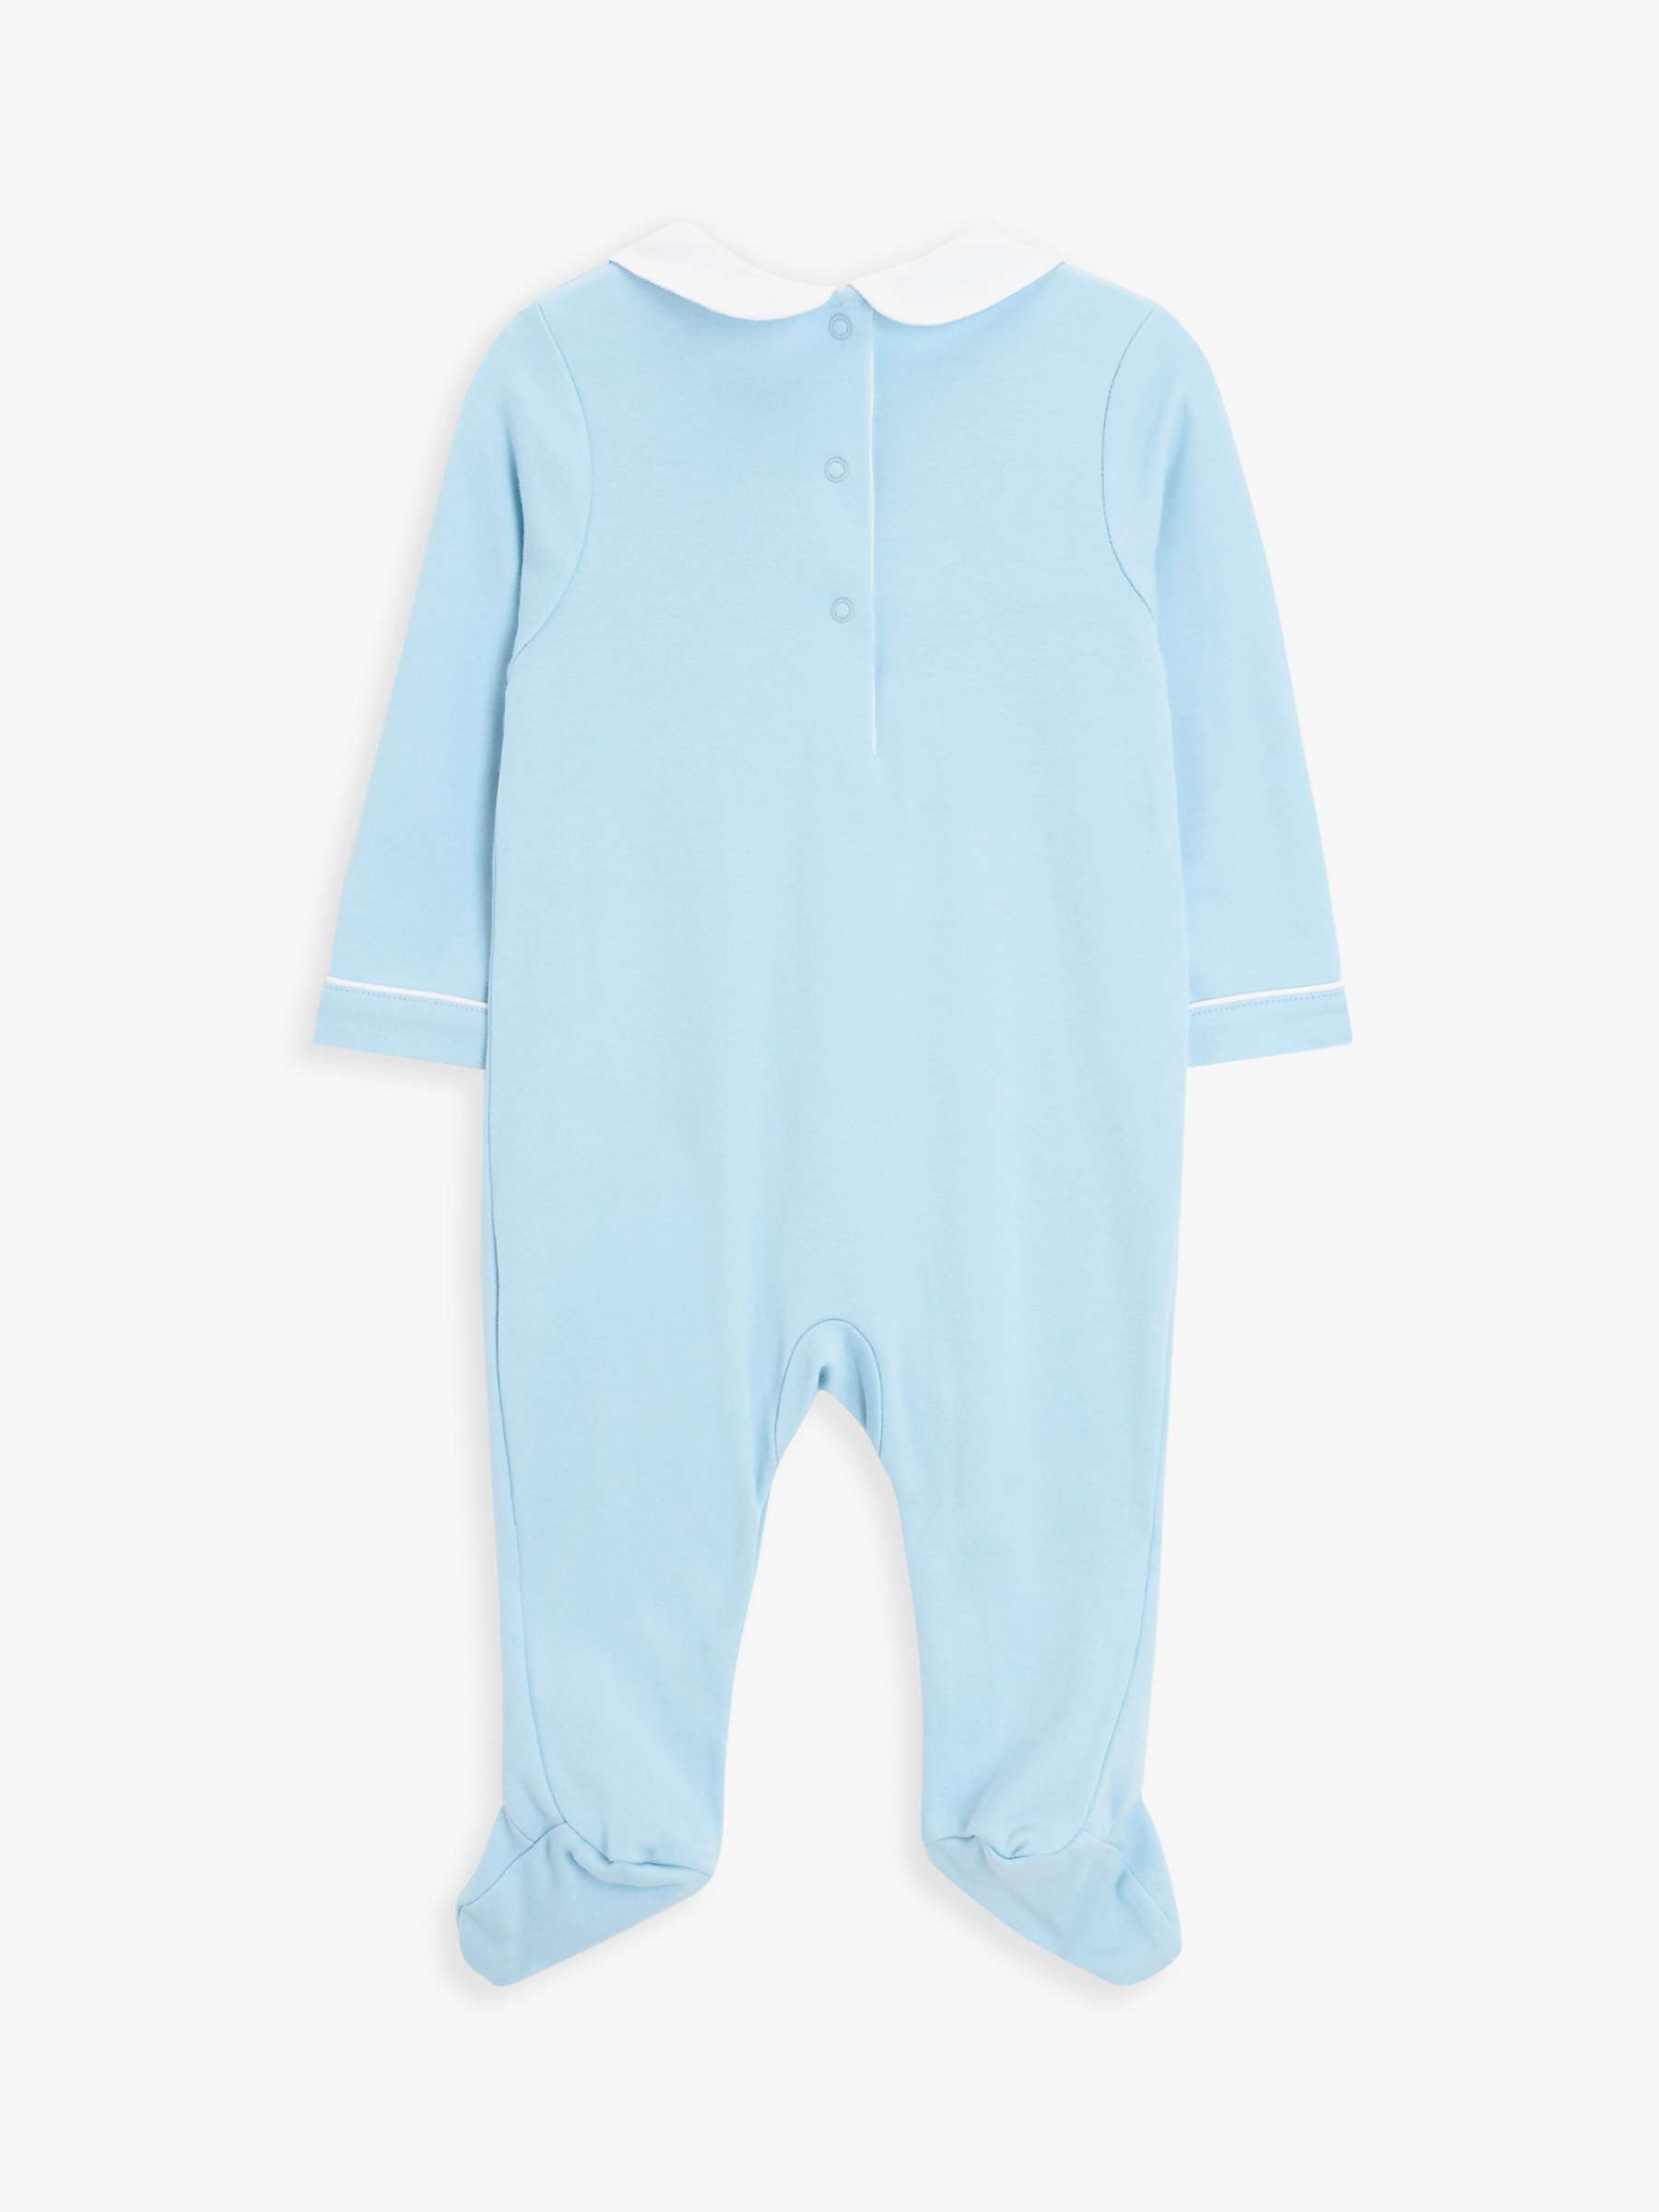 Buy John Lewis Heirloom Collection Baby Pima Cotton Smocked Sleepsuit, Blue Online at johnlewis.com